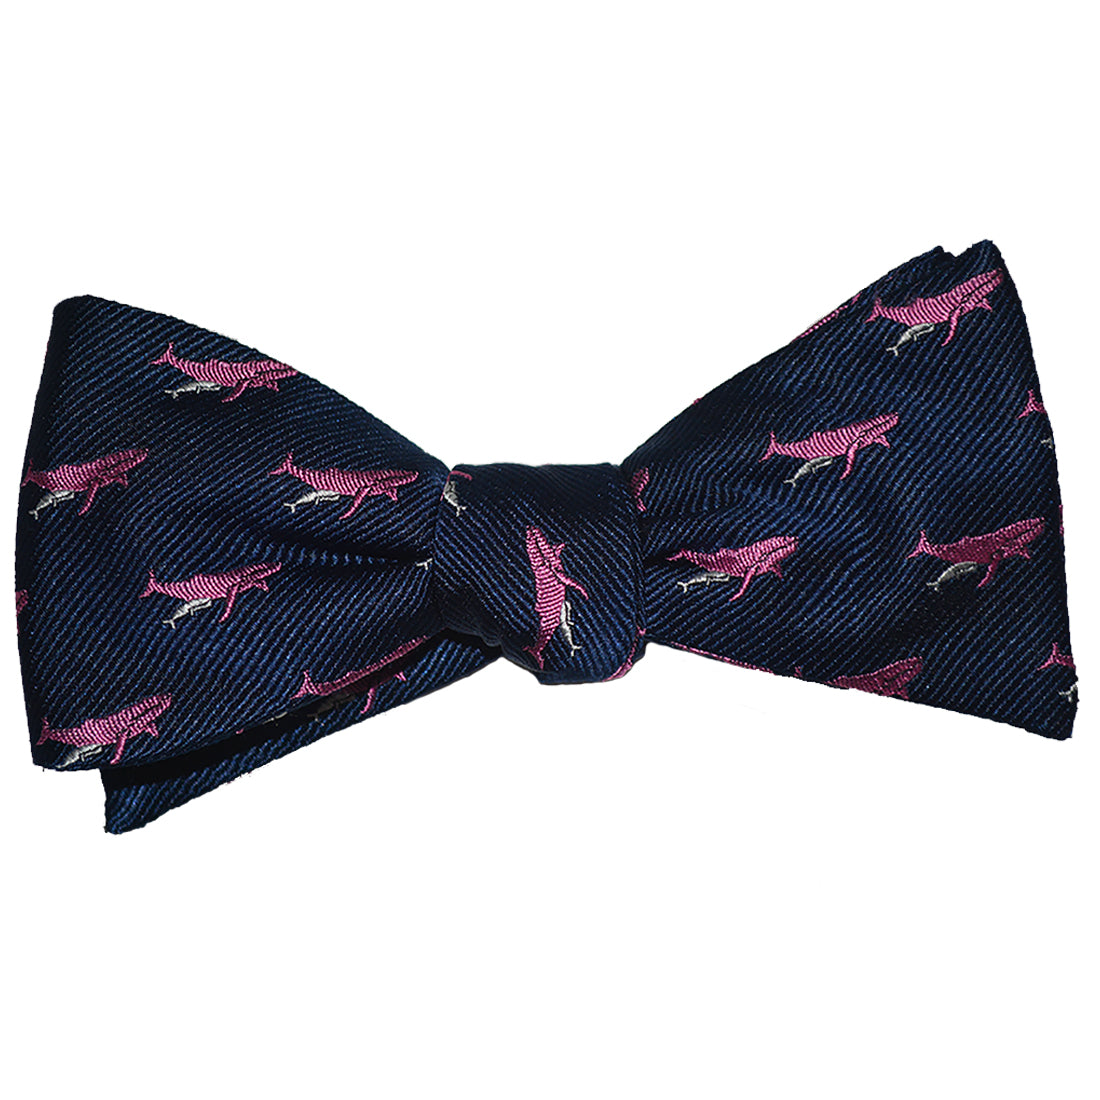 Humpback Whale Bow Tie - Woven Silk - SummerTies